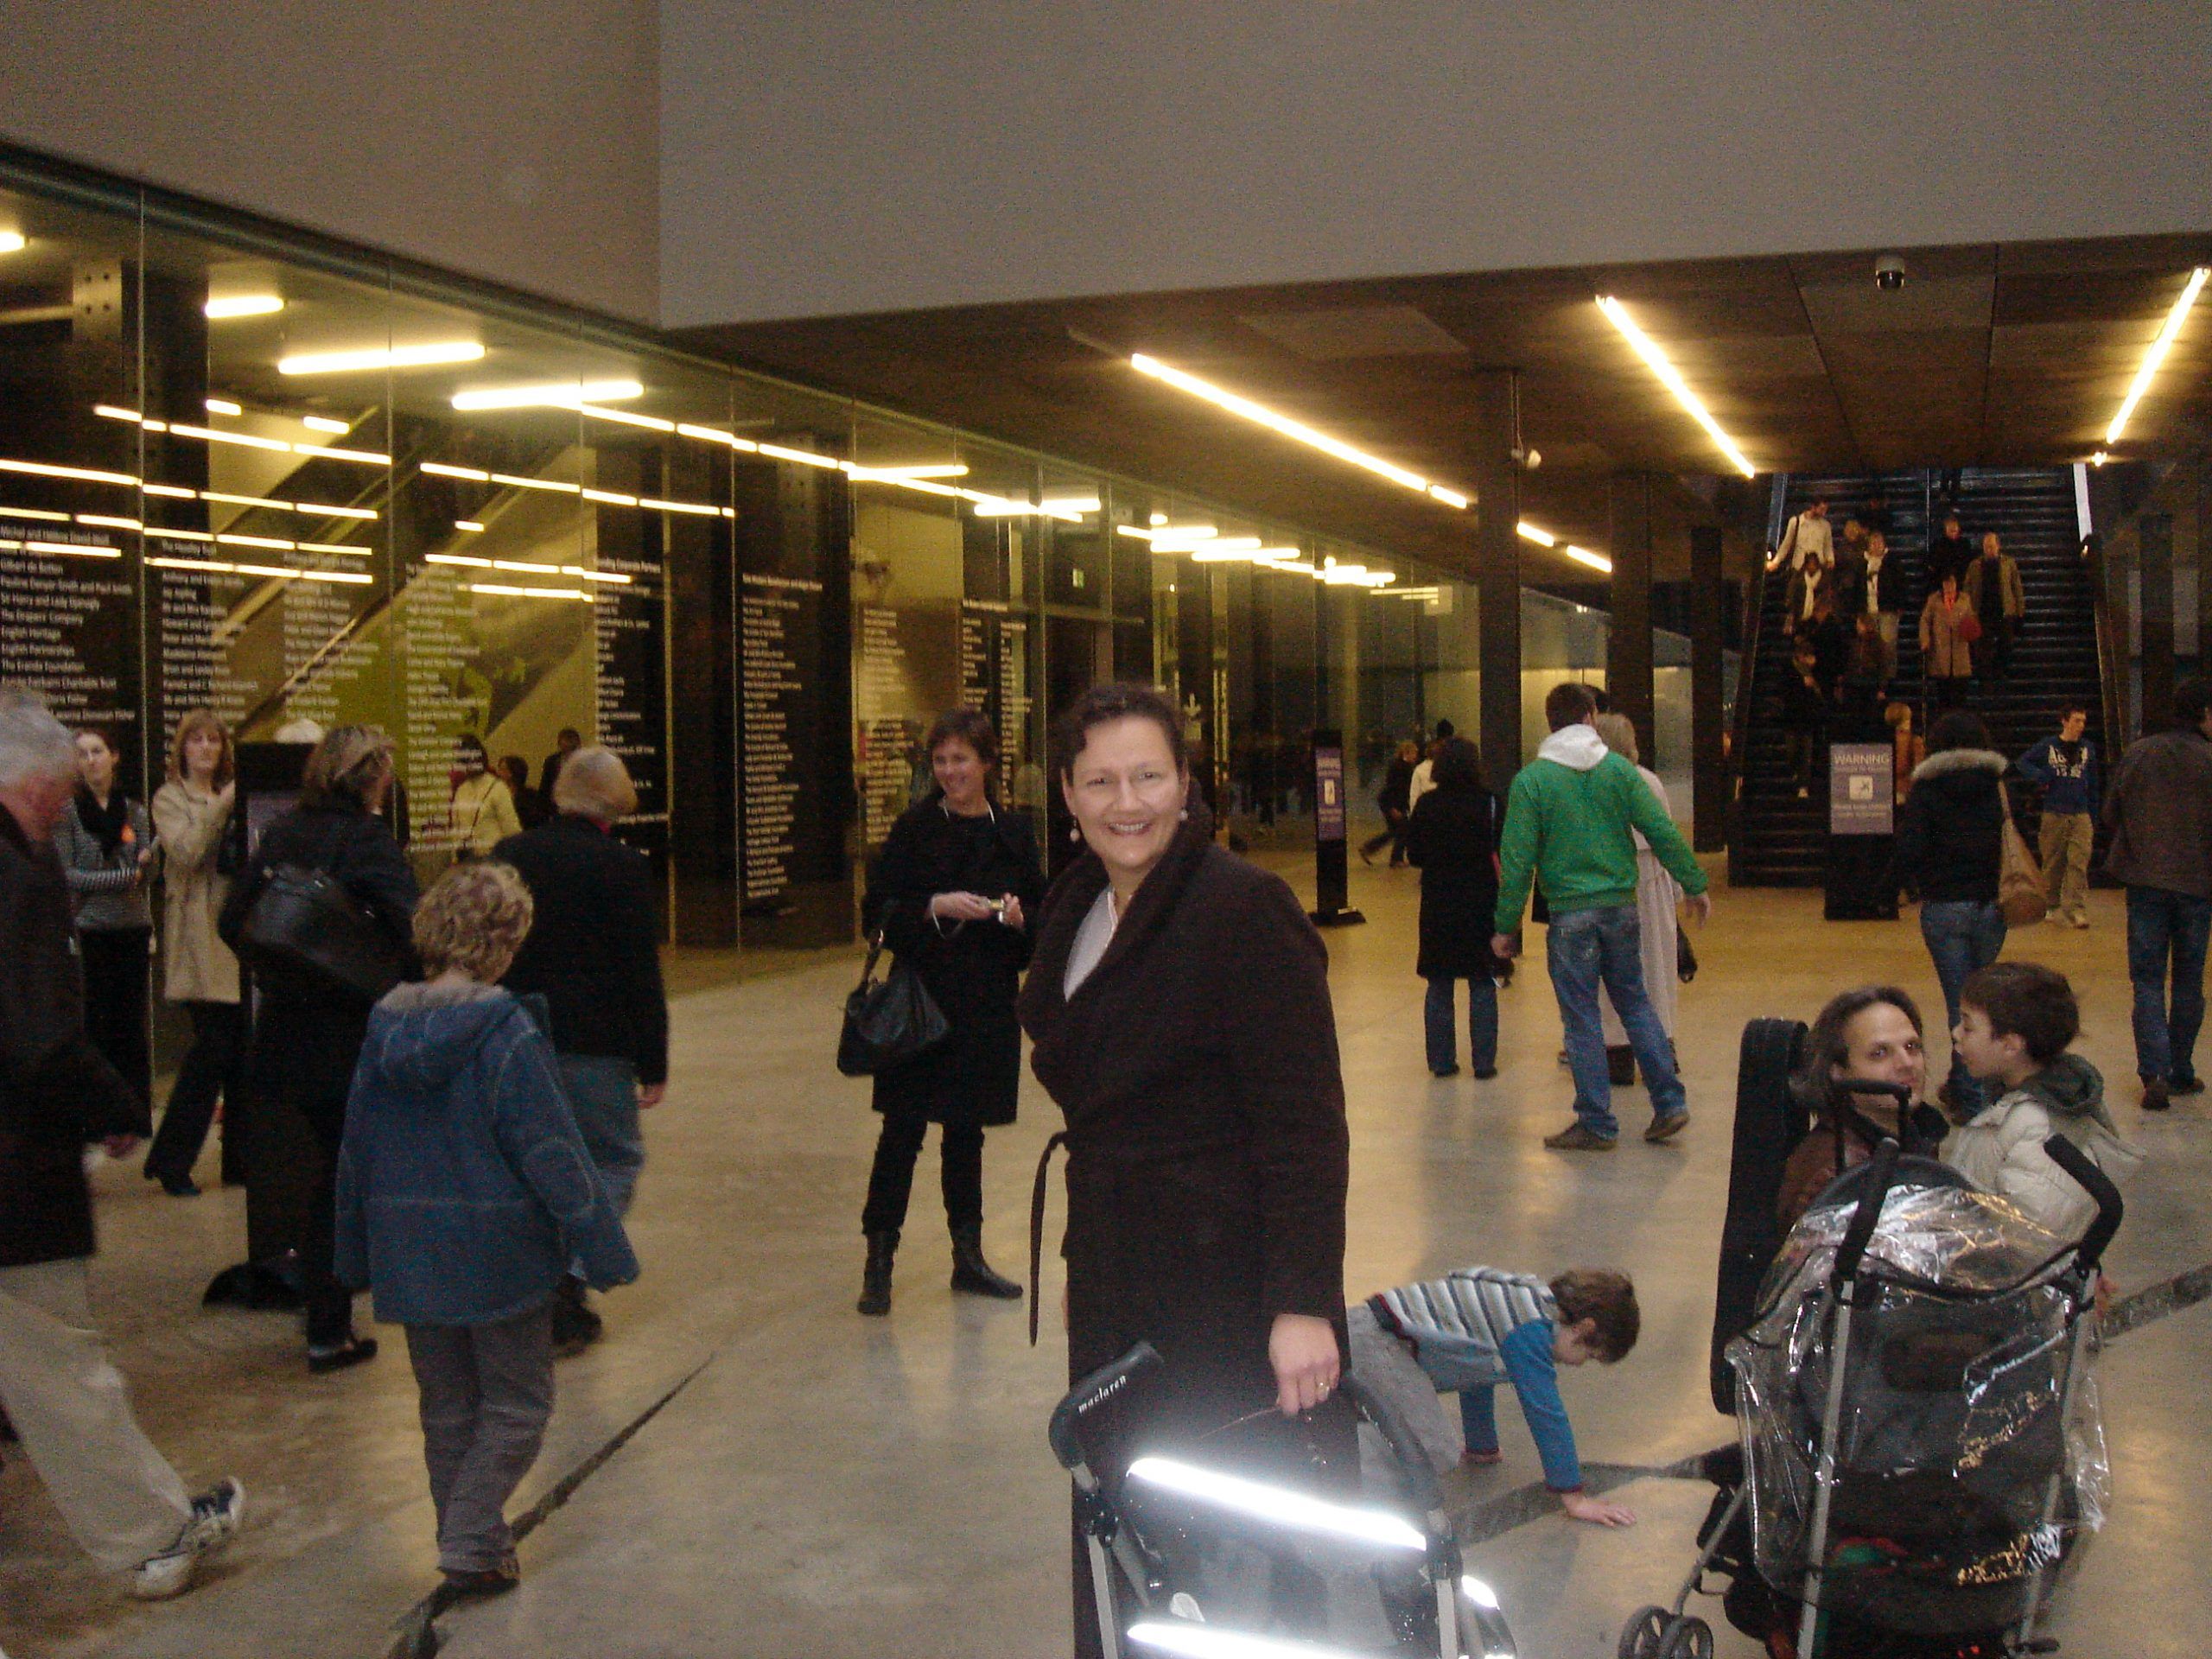 My friend Angela is standing in the foyer of the Tate Modern; she is holding onto a stroller. The foyer full of people going in different directions.